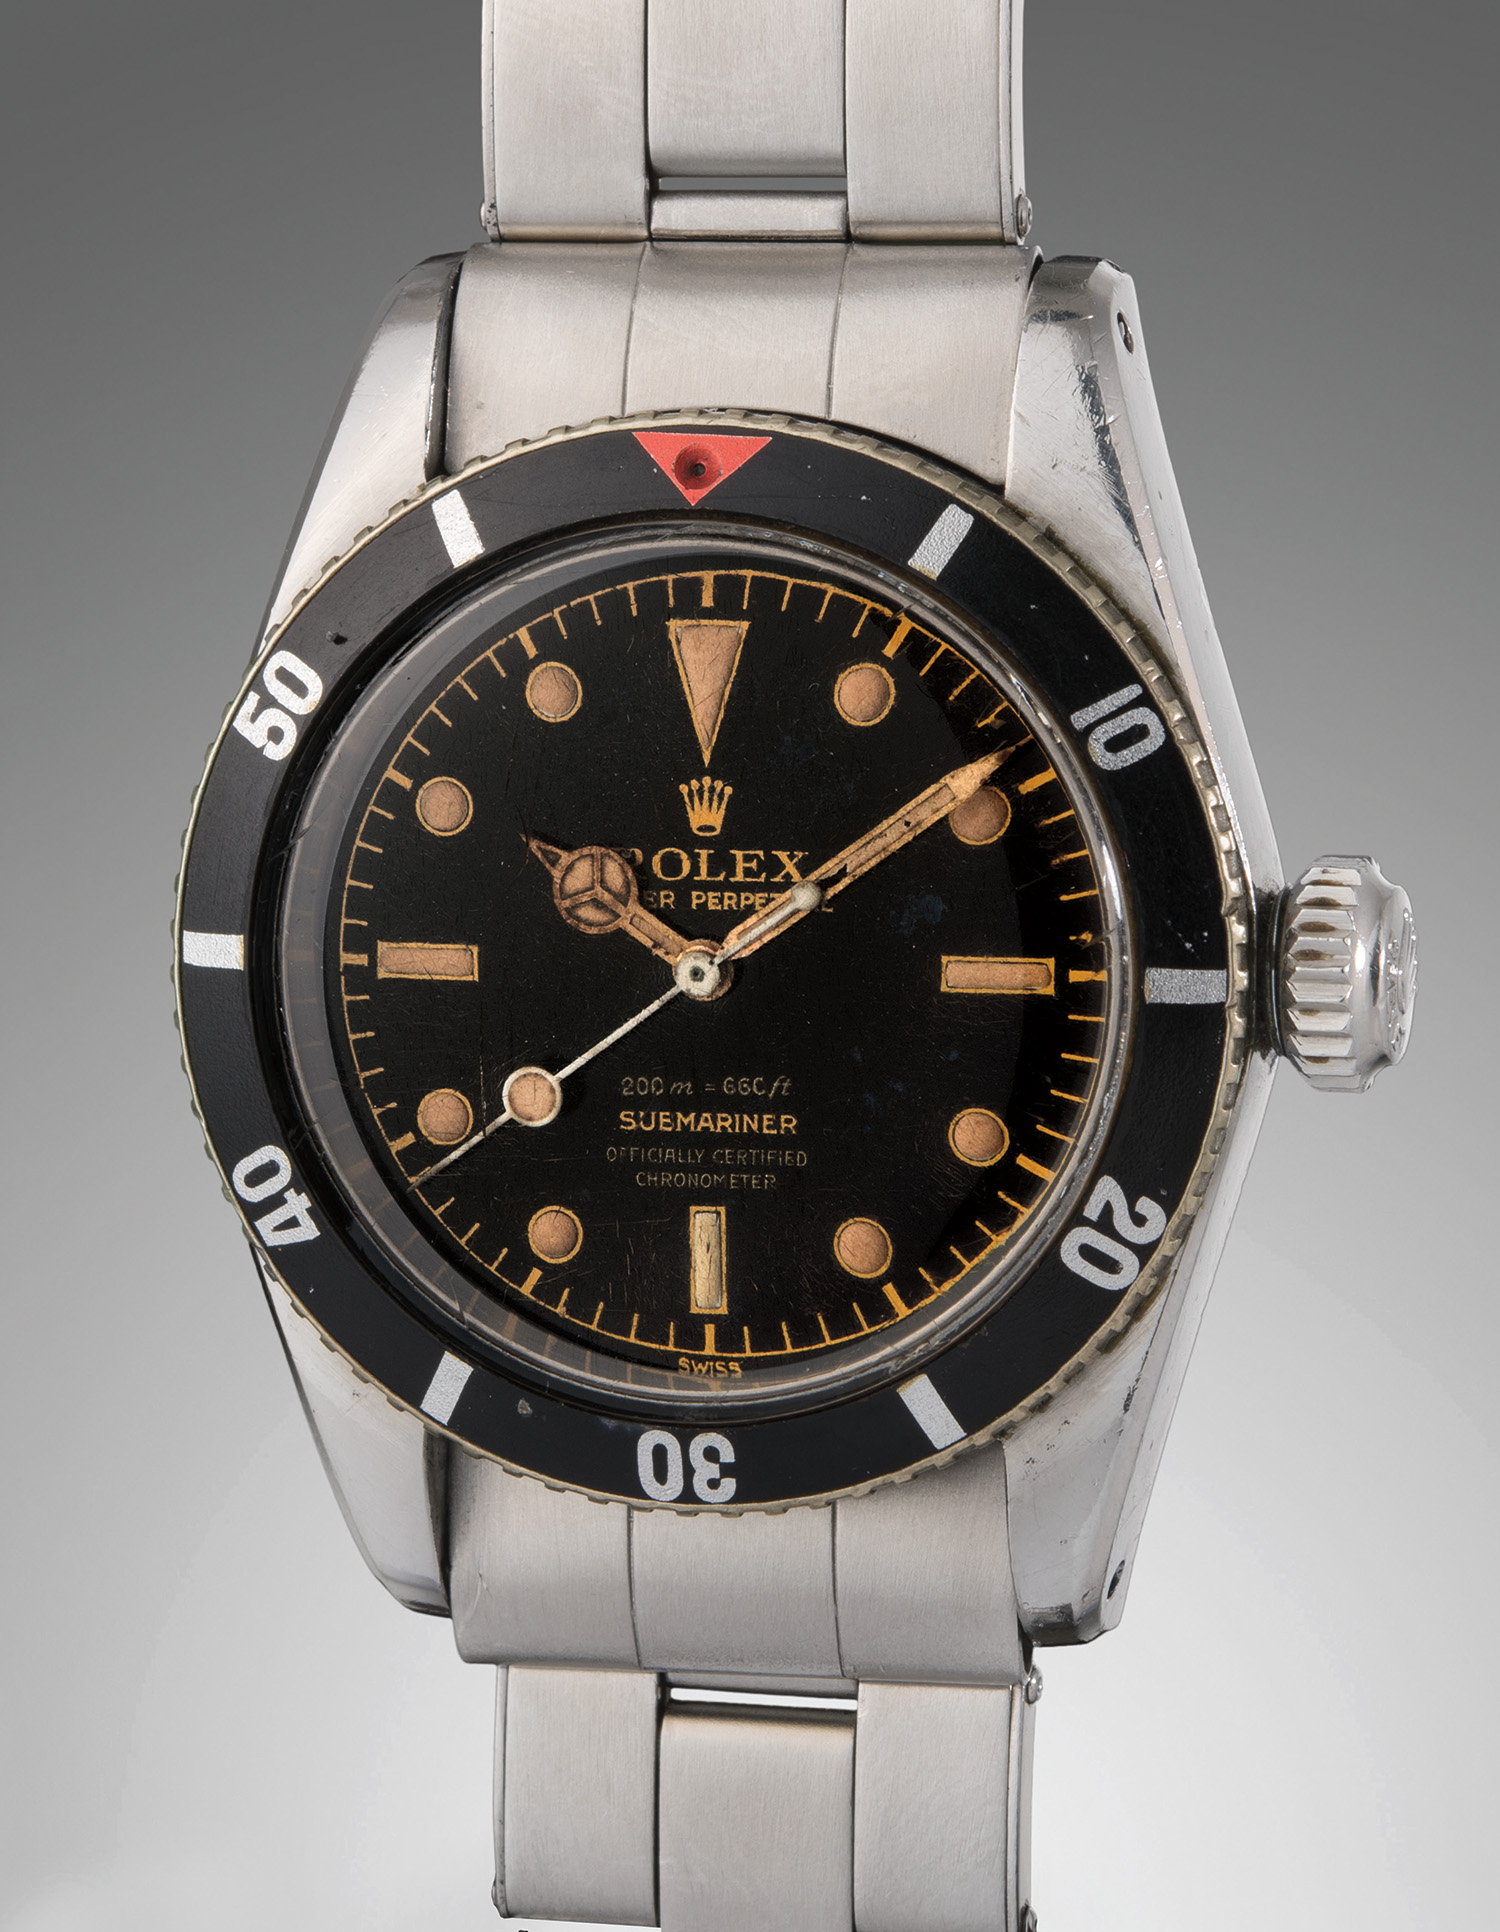 The 1957 Rolex “Big Crown” Submariner is the same “James Bond” Submariner which has been immortalised onscreen by Sean Connery in Dr. No and Goldfinger. The watch is well-preserved and has never been polished or restored, and sold for $567,000.